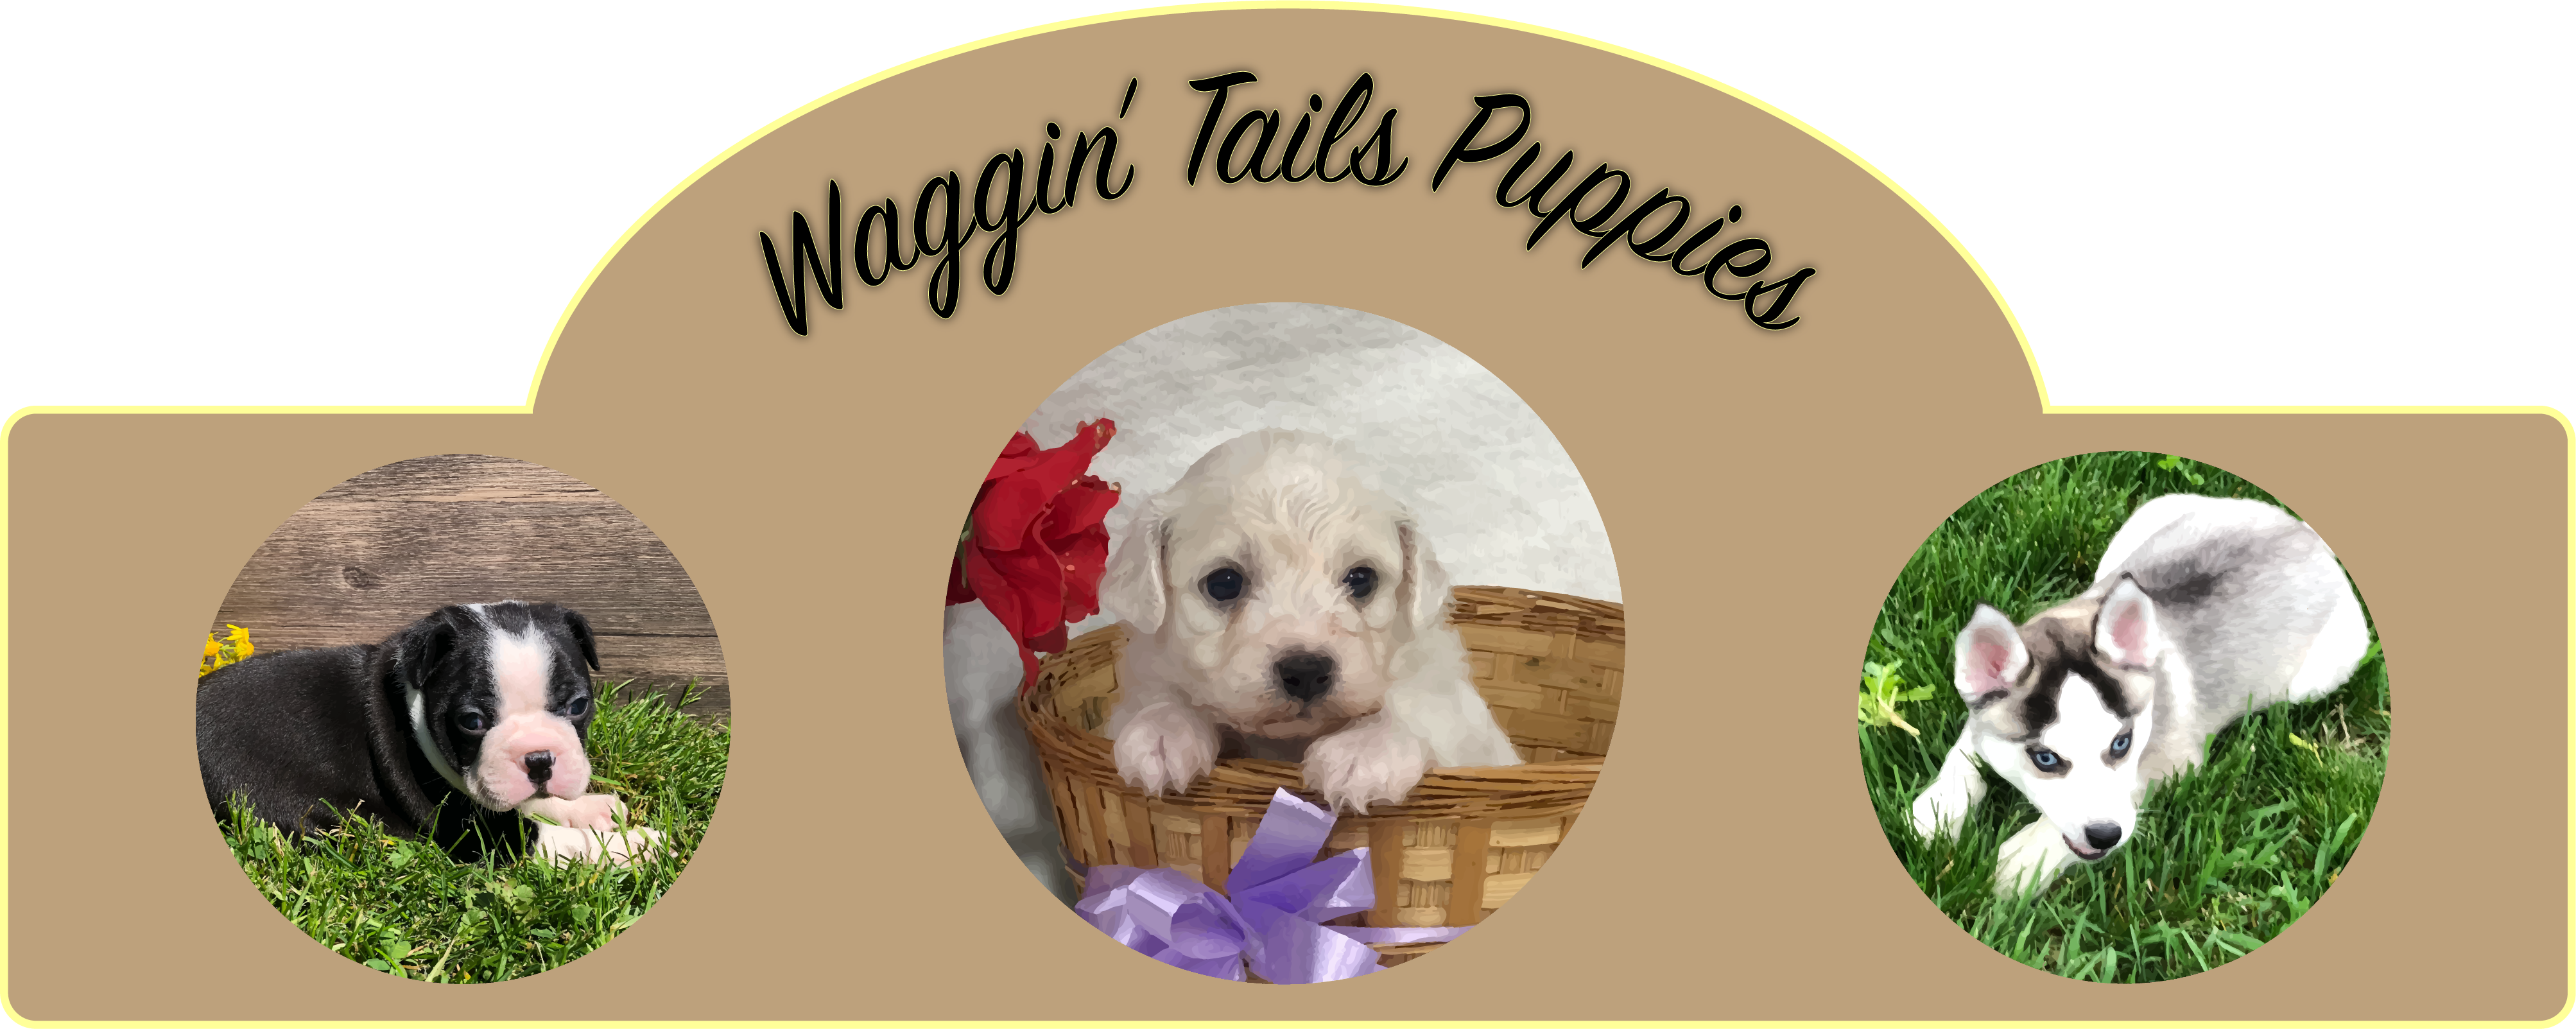 Waggin Tails Puppies